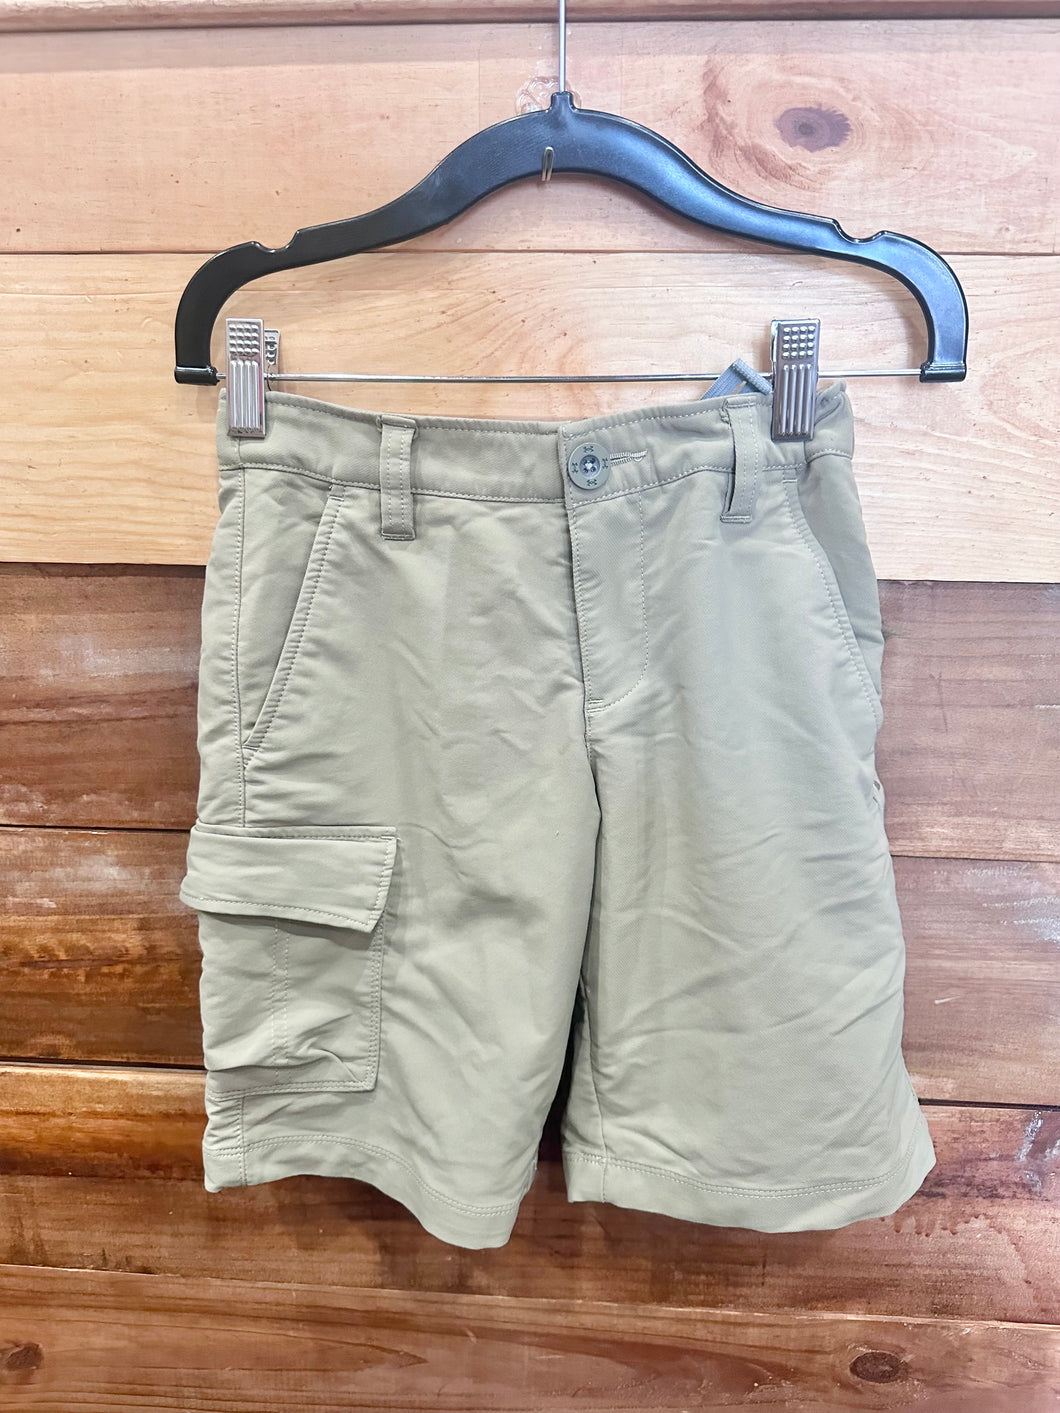 Under Armour Brown Shorts Size 8